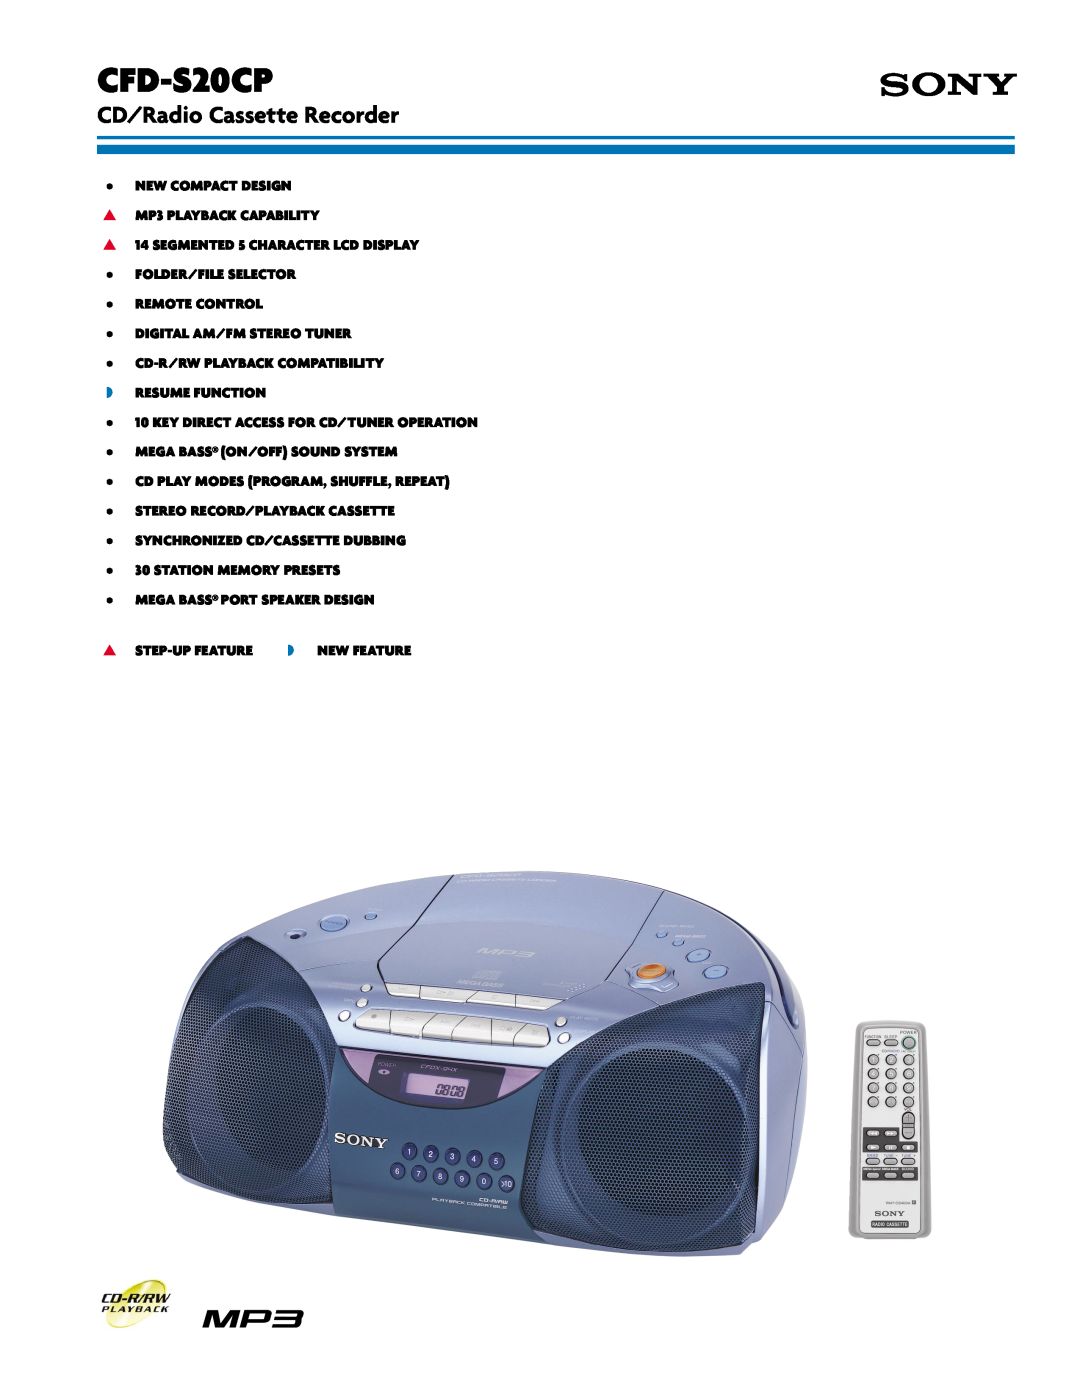 Sony CFD-S20CP manual CD/Radio Cassette Recorder 